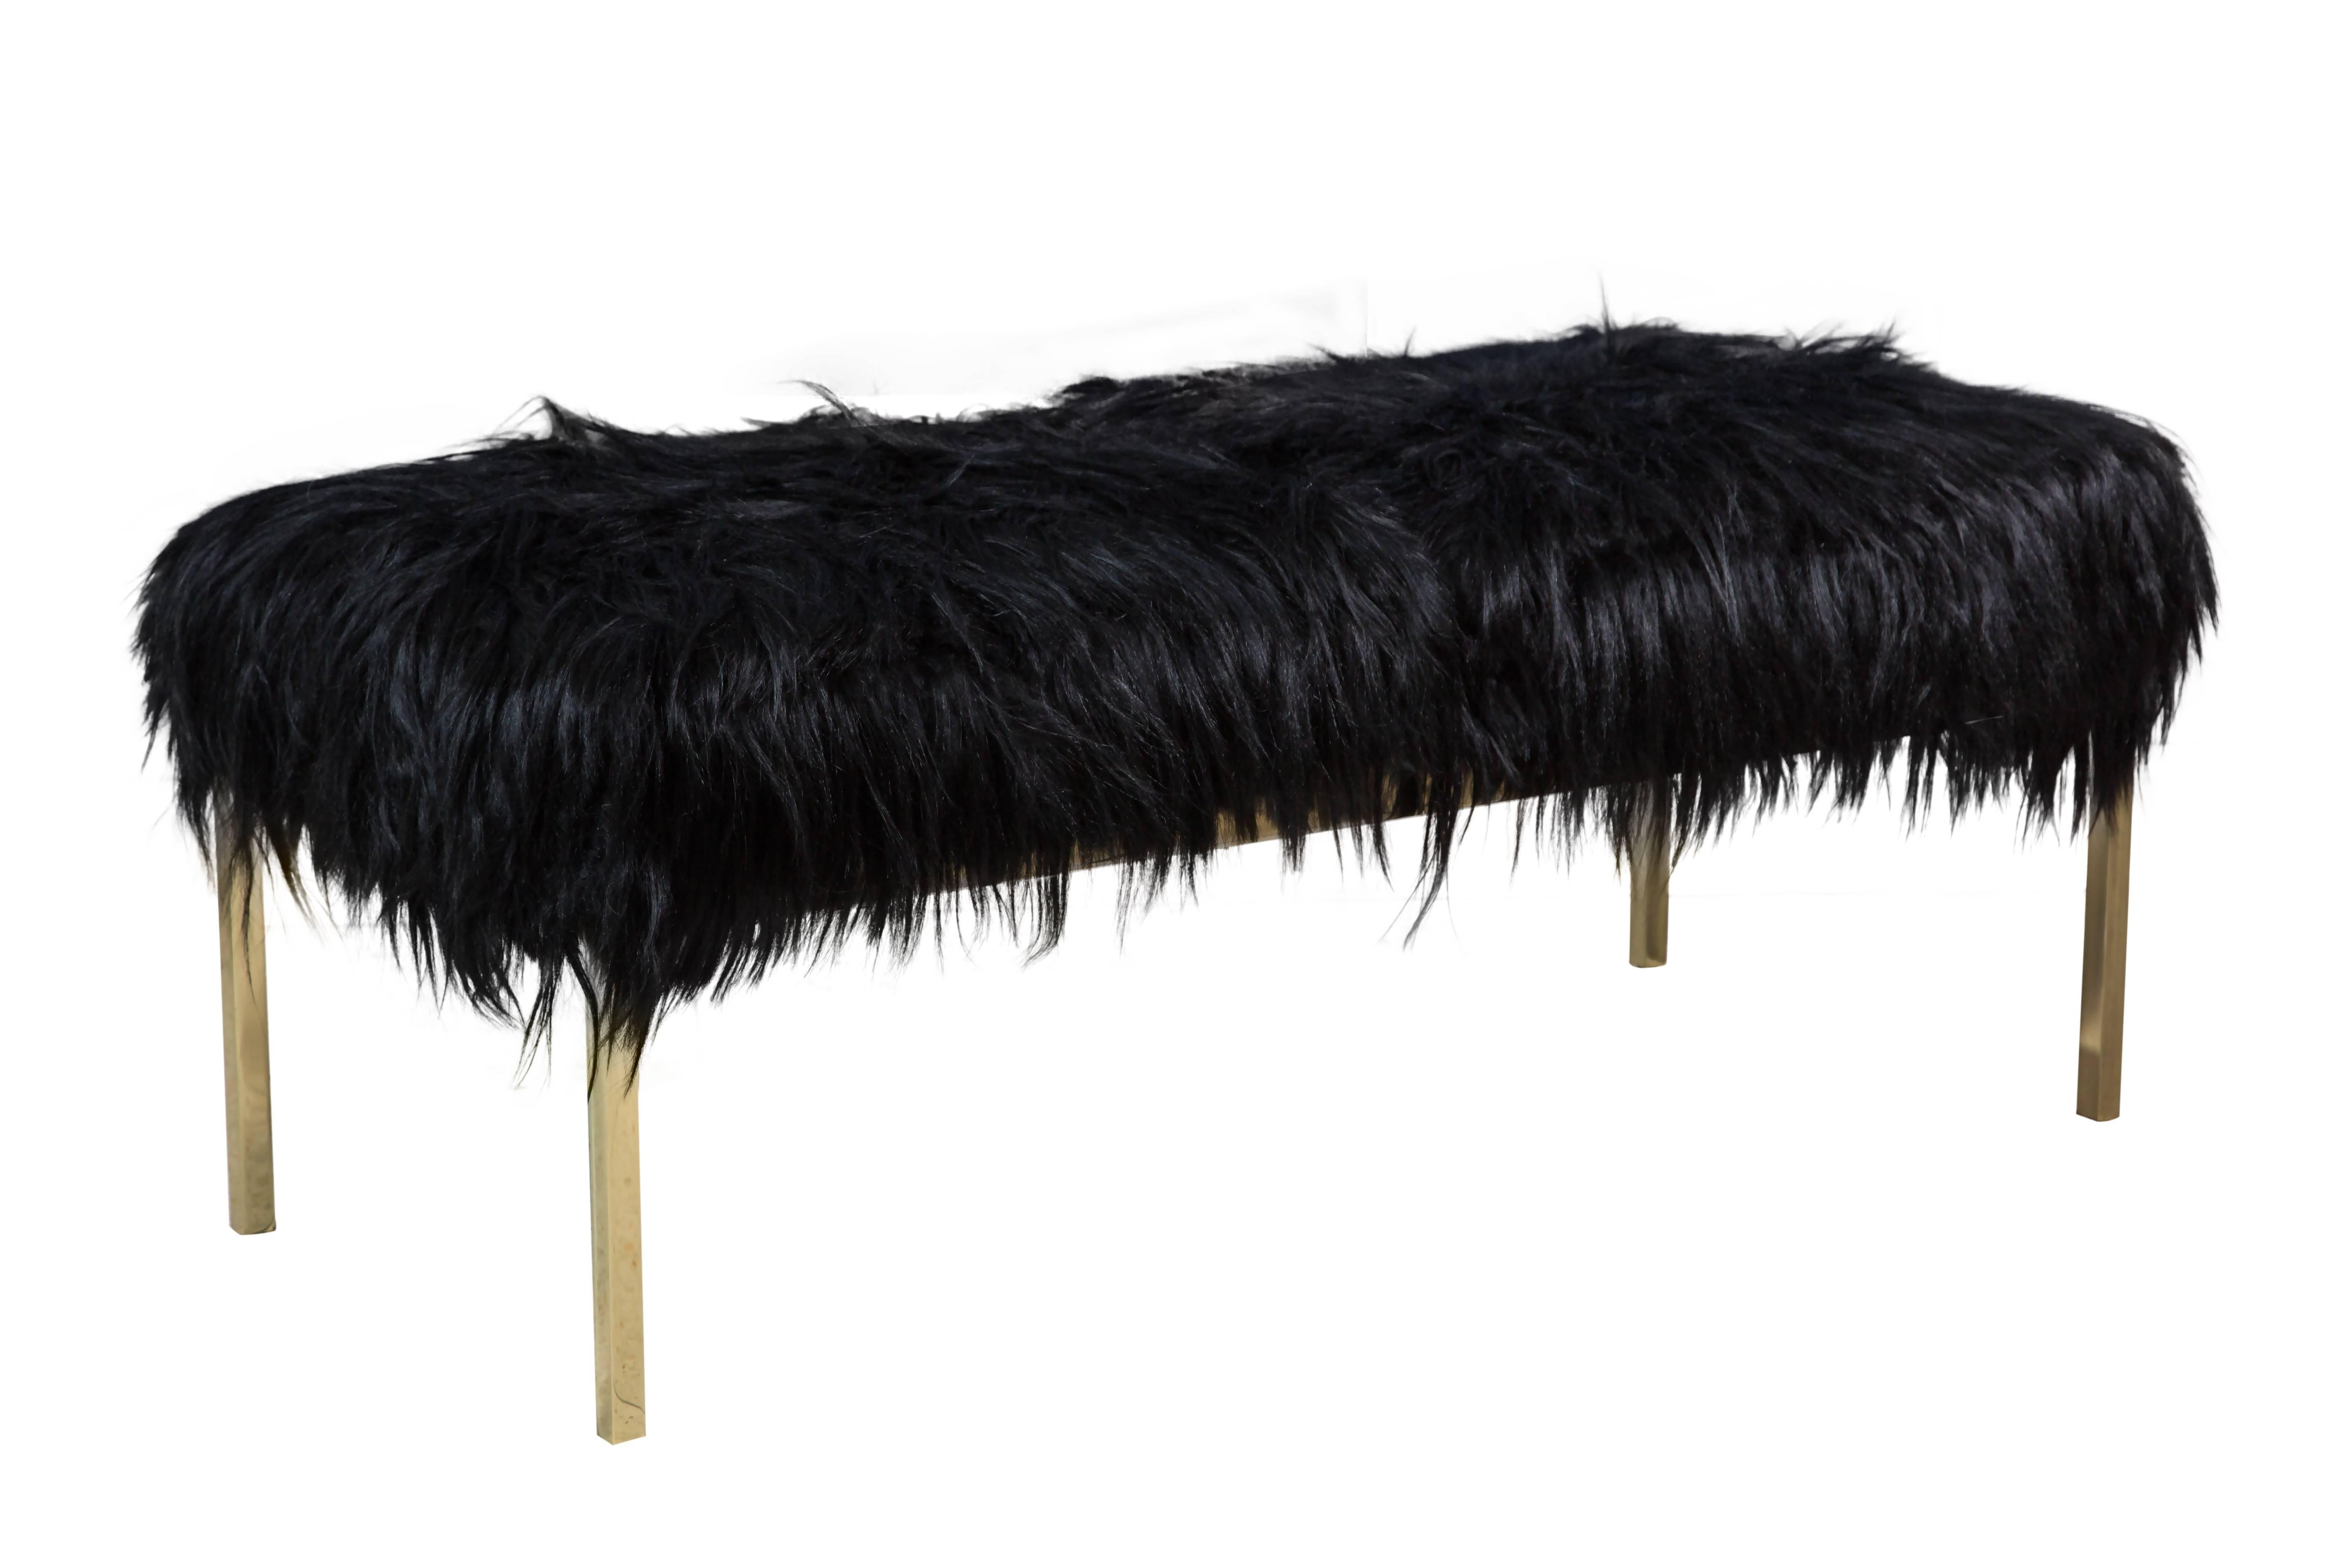 Chic pair of polished brass benches designed by Arthur Elrod, 1960s. Newly re-plated and upholstered in black goat fur. Excellent restored condition.  